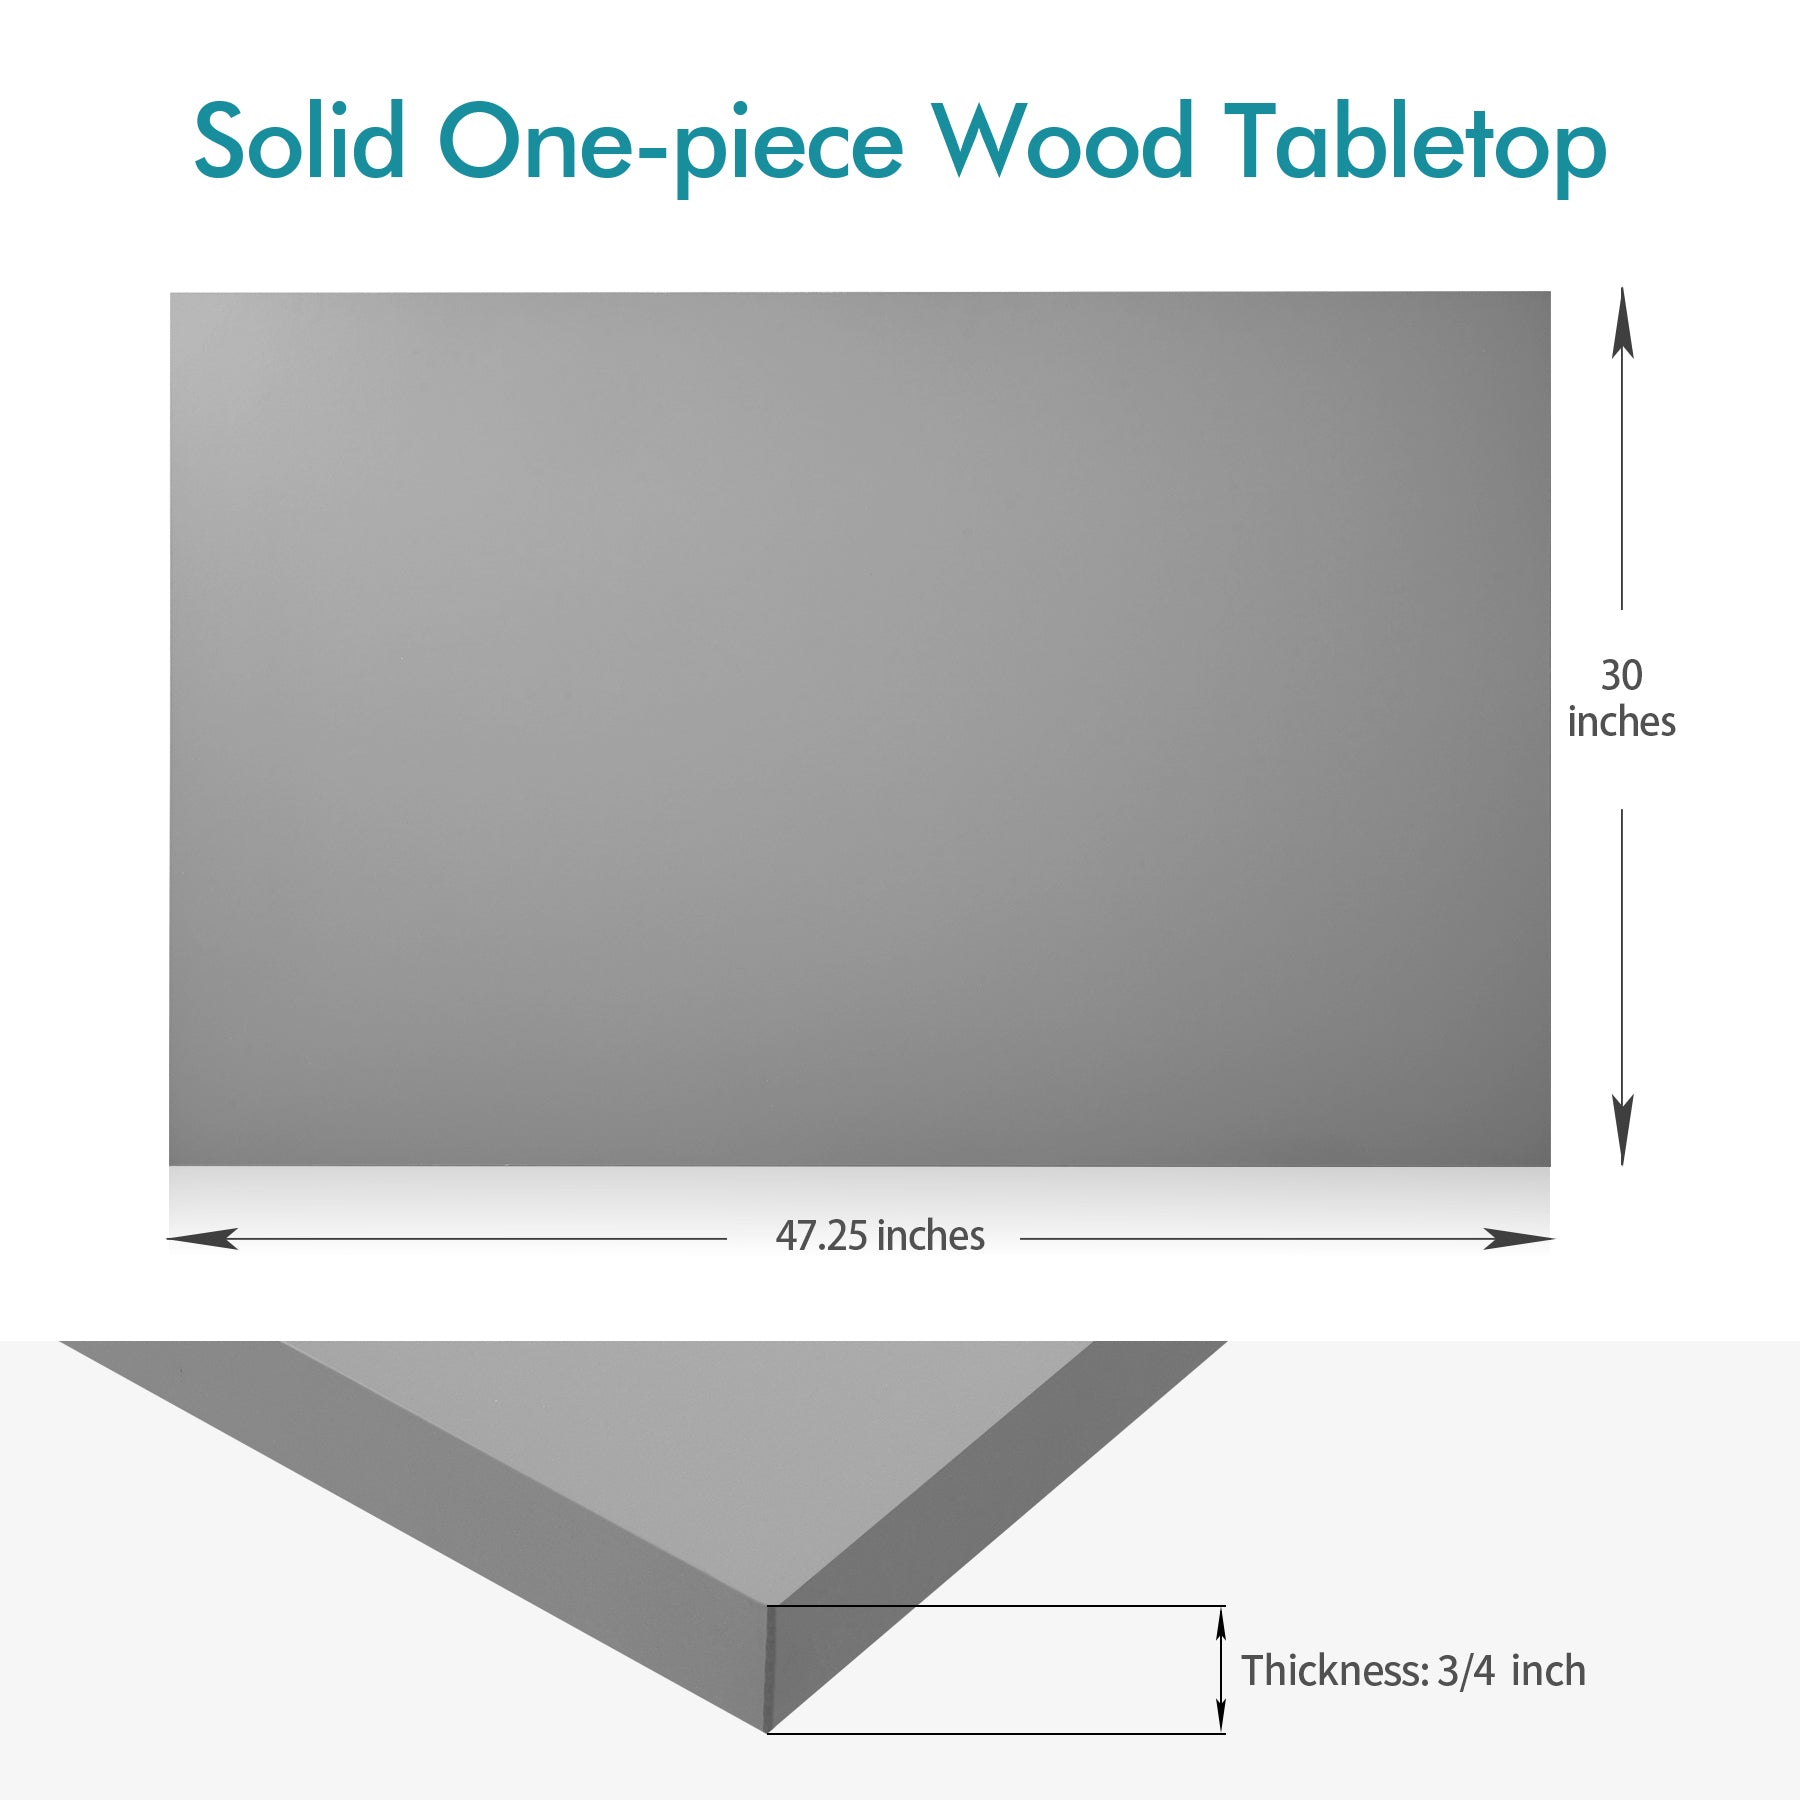 48x30 one-piece wood table top in gray